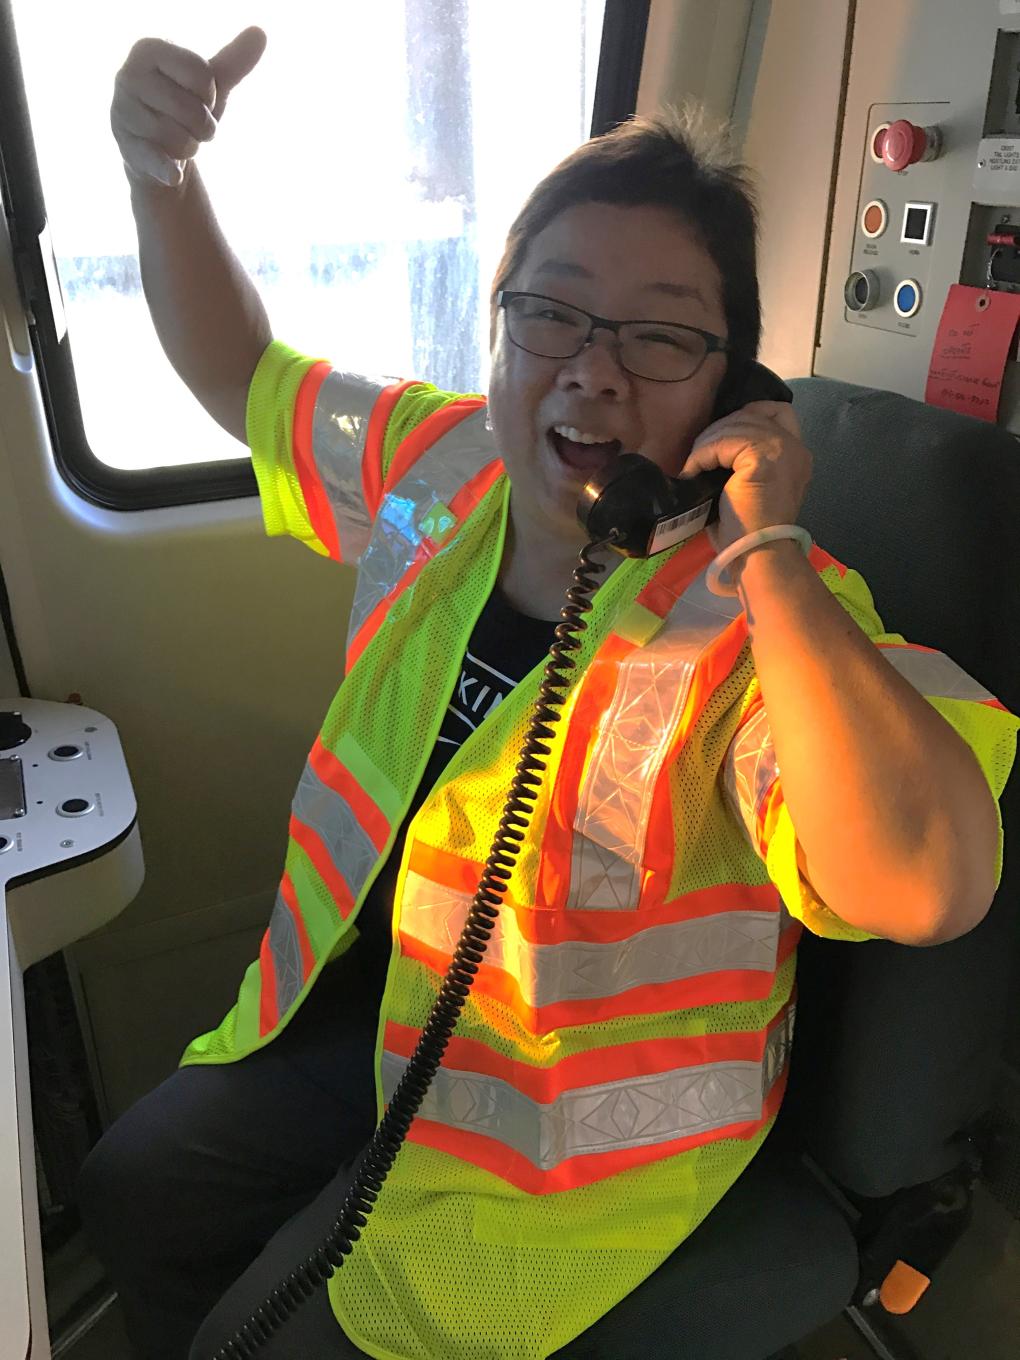 A recent photo of Mama Linda in a train car cab in a yellow vest doing a thumbs up and holding a black phone,.